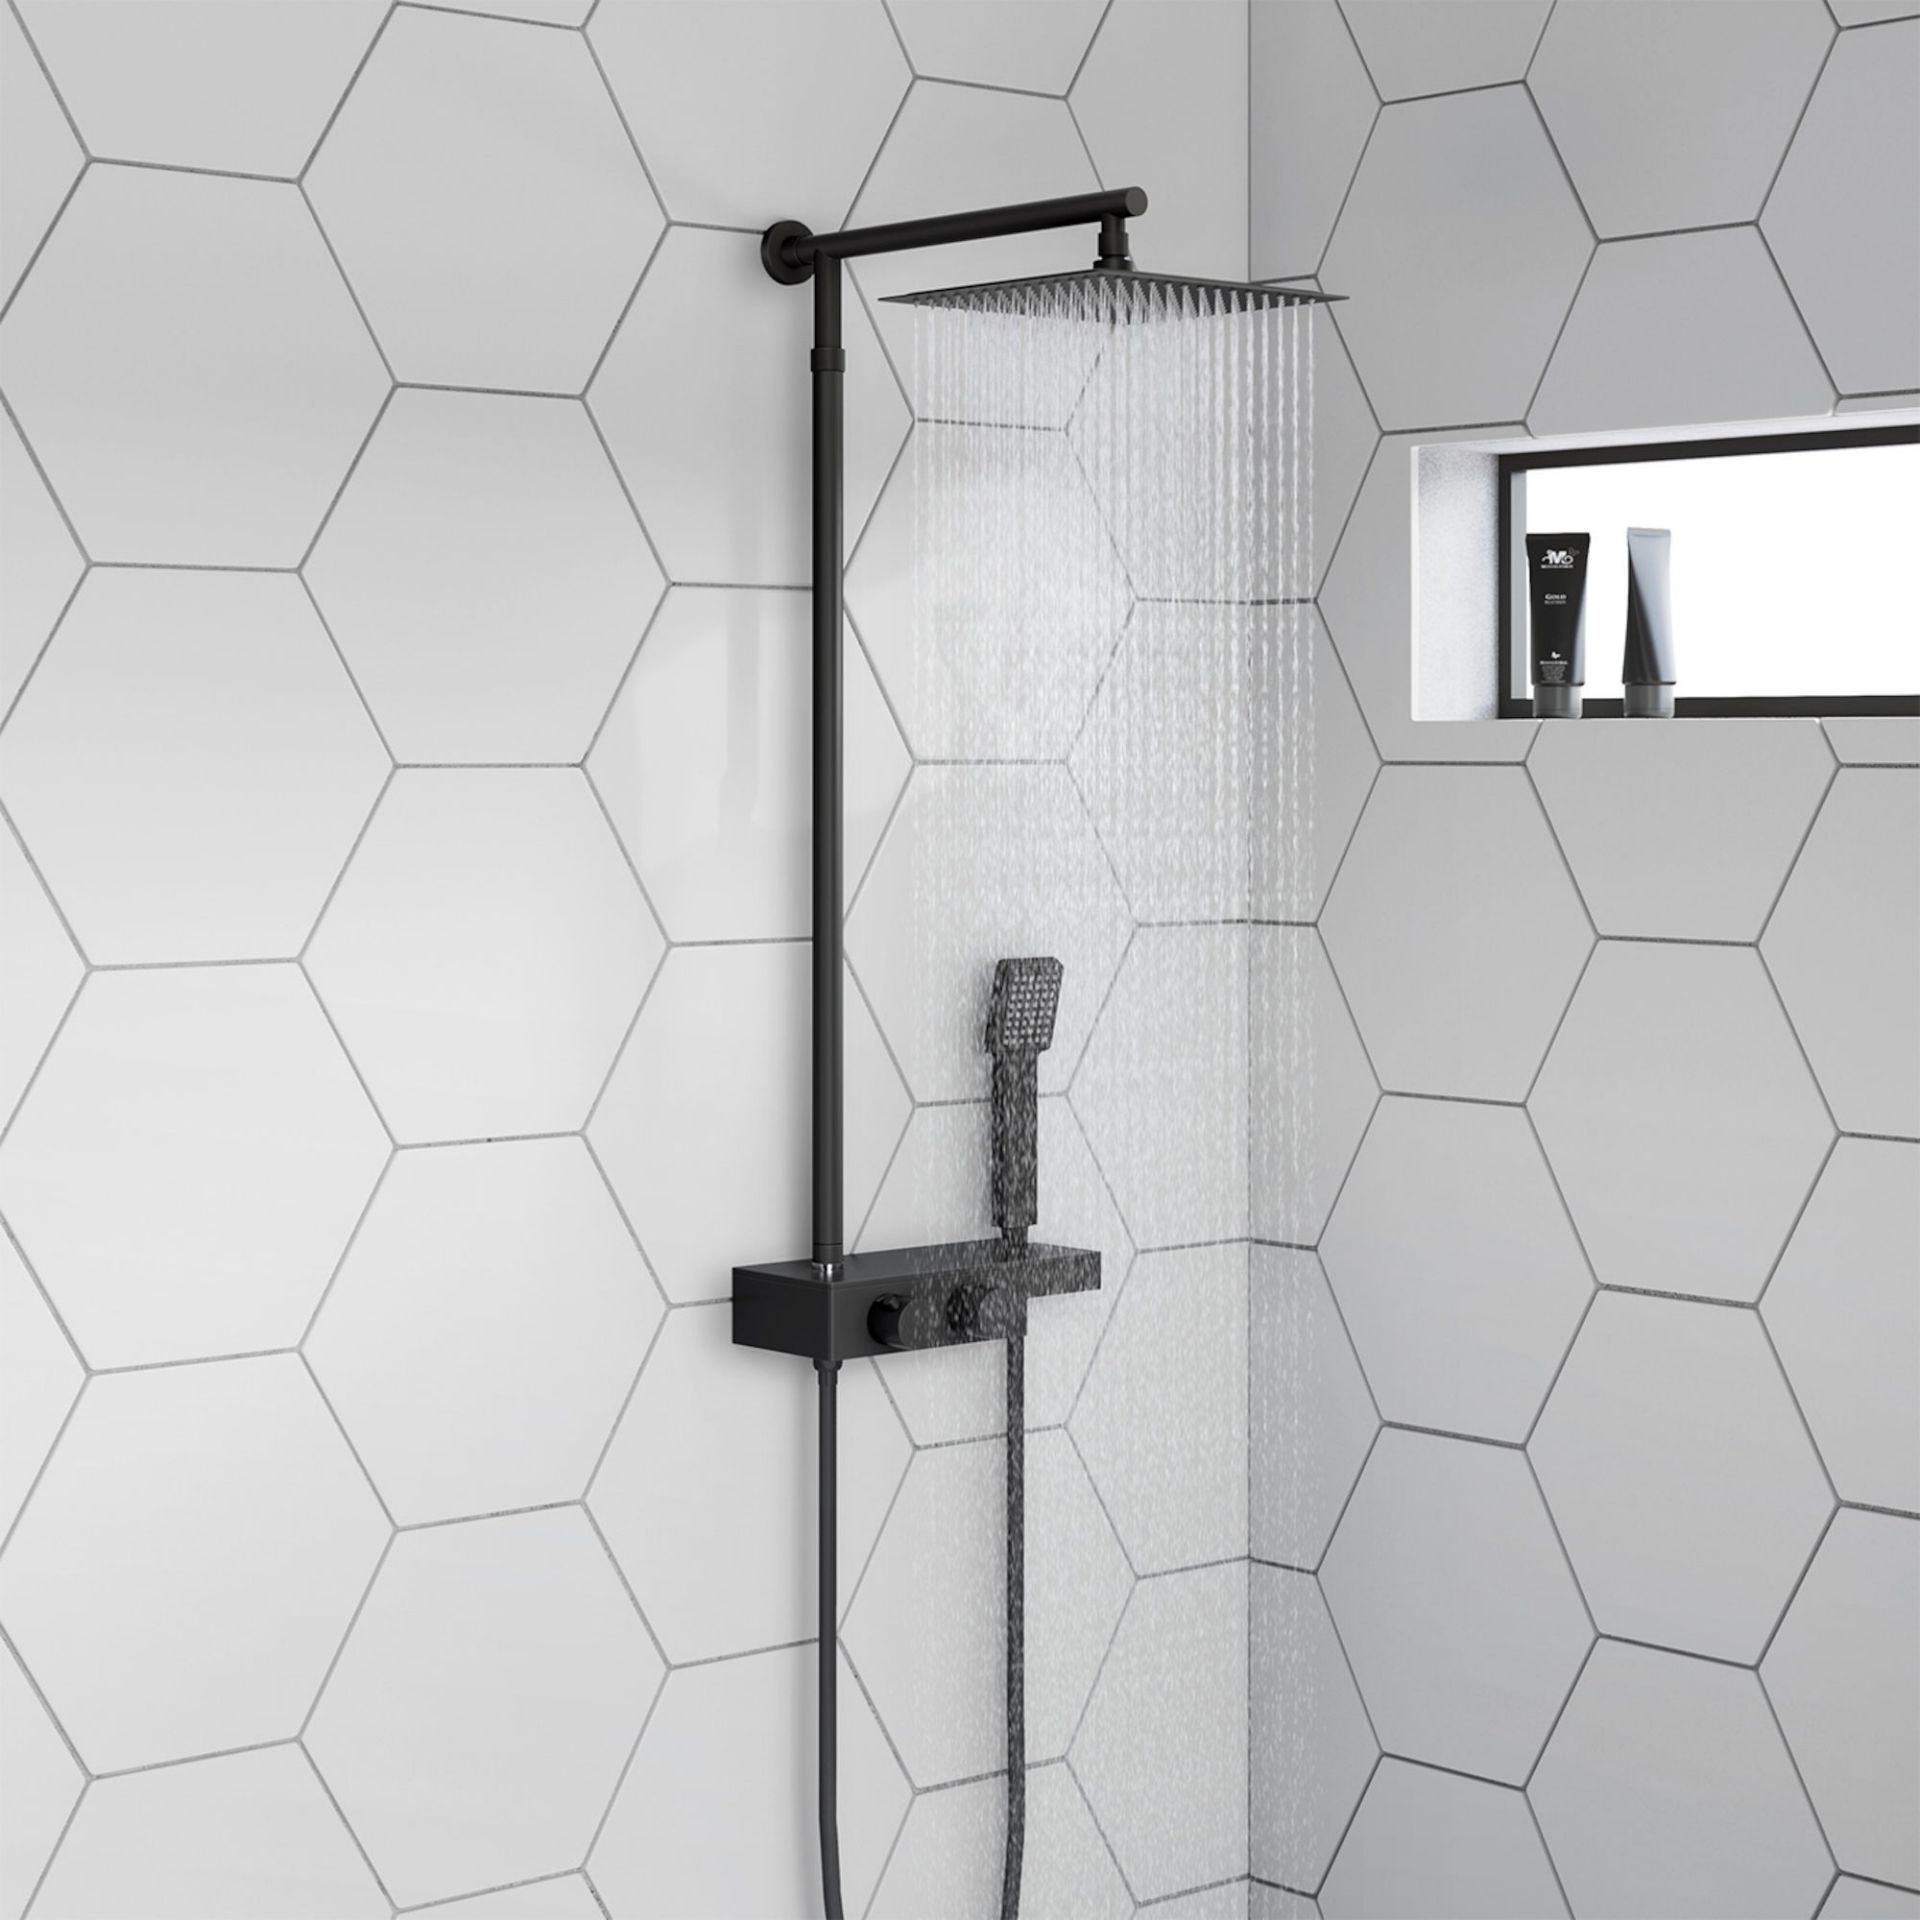 NEW & BOXDED Matte Black Square Thermostatic Mixer Shower Kit & Shelf. RRP £599.99.SP5102BL... - Image 3 of 3